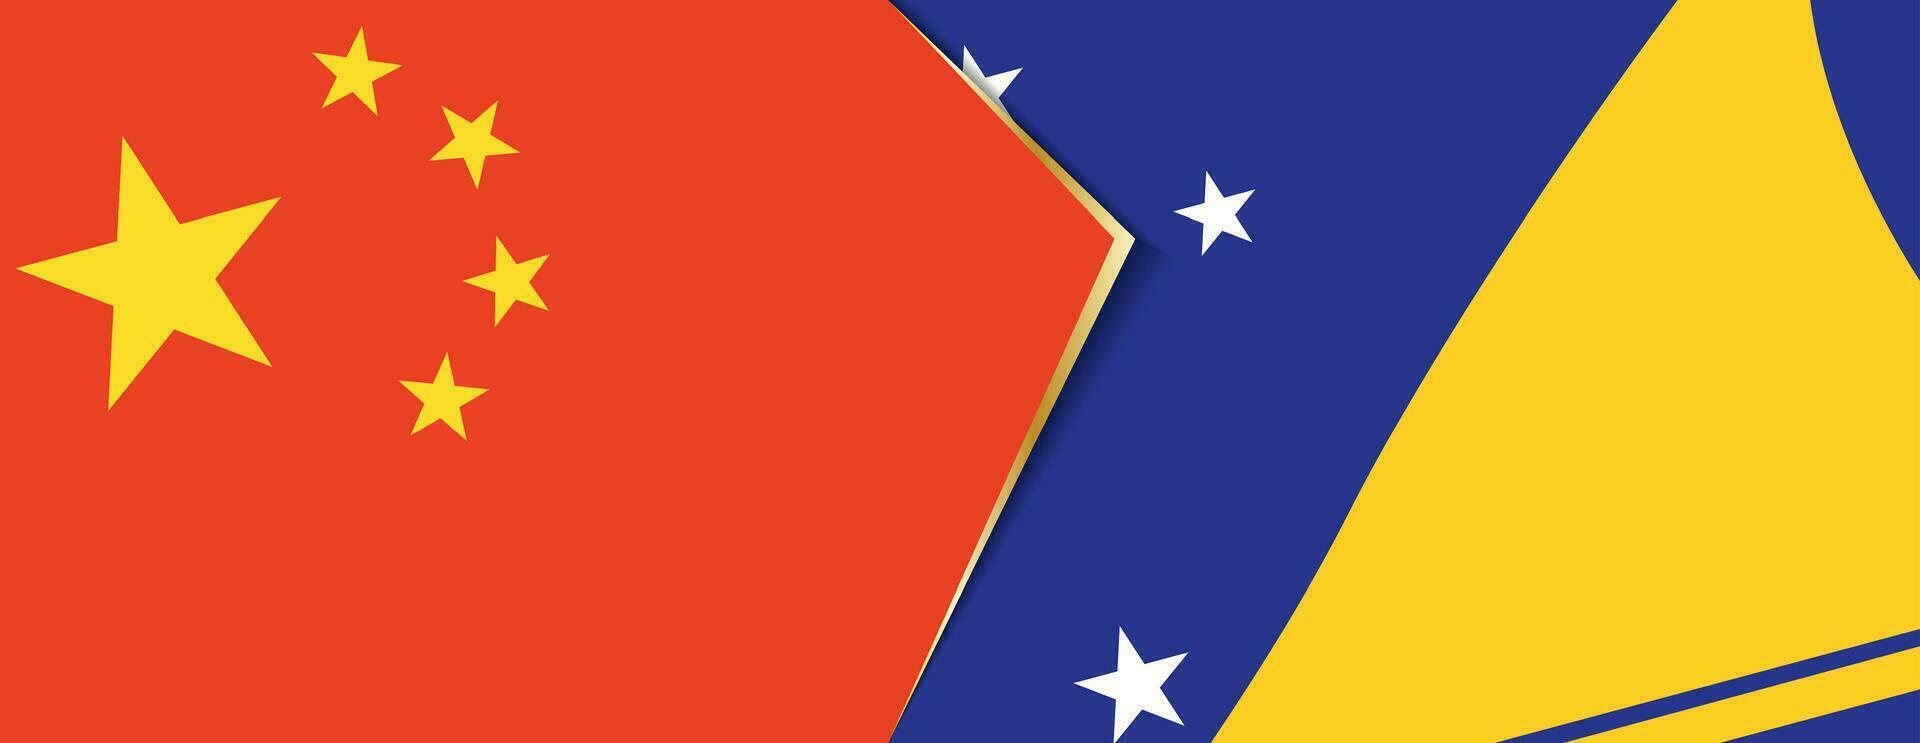 China and Tokelau flags, two vector flags.